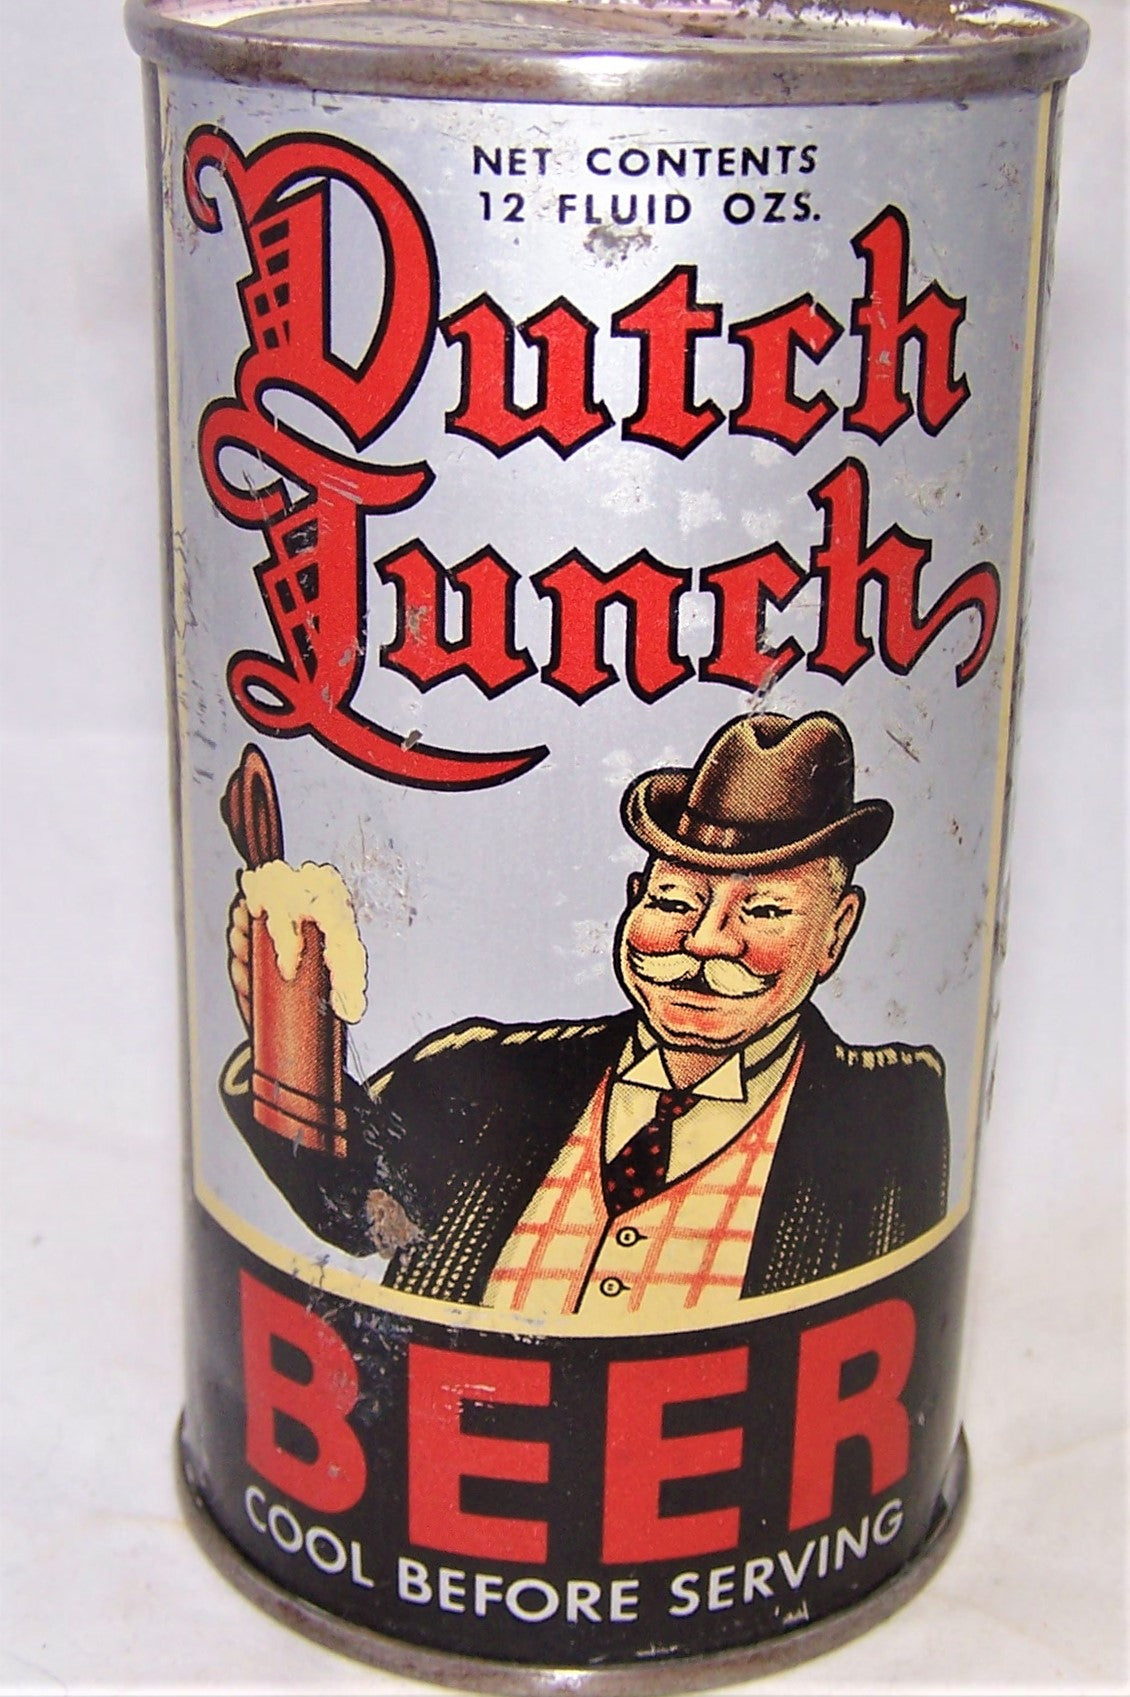 Dutch Lunch Beer, Lilek # 208 and USBC 57-26, Grade 1- Sold on 02/22/19